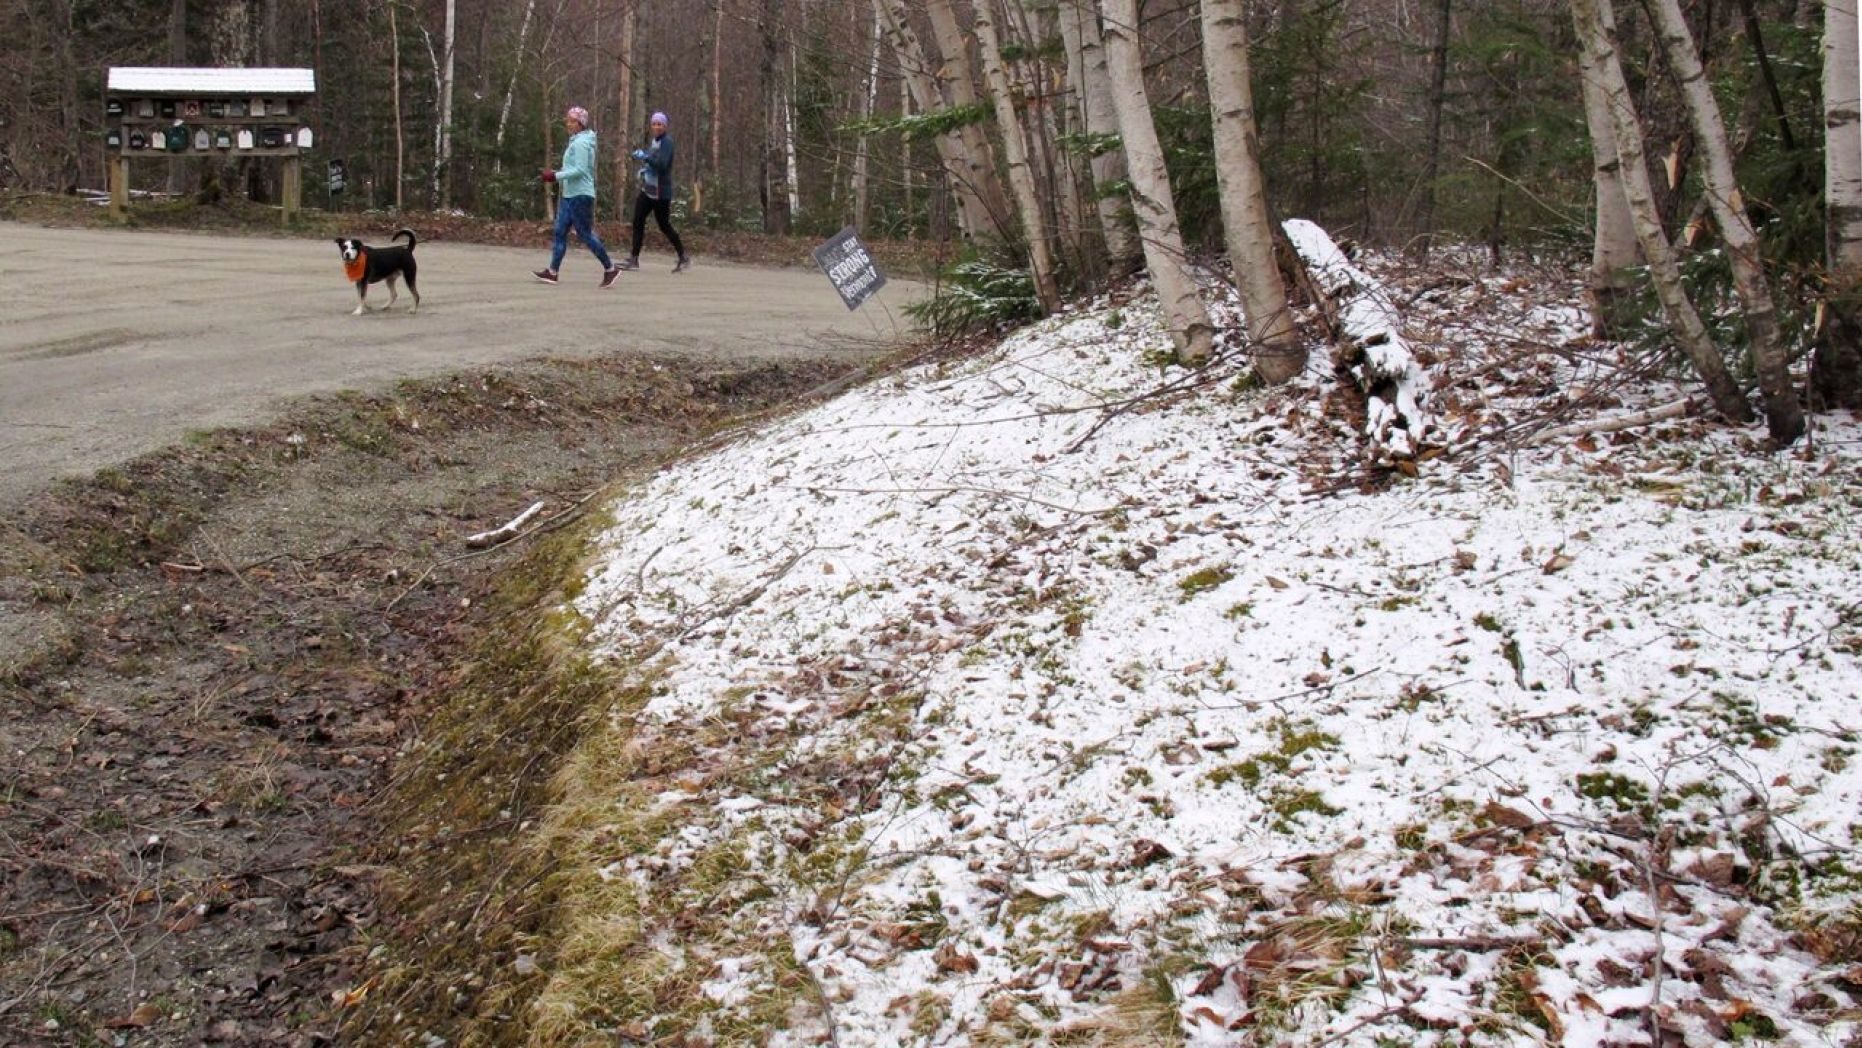 A dusting of snow covers a hillside in Stowe, Vt., on Tuesday May 5, 2020.